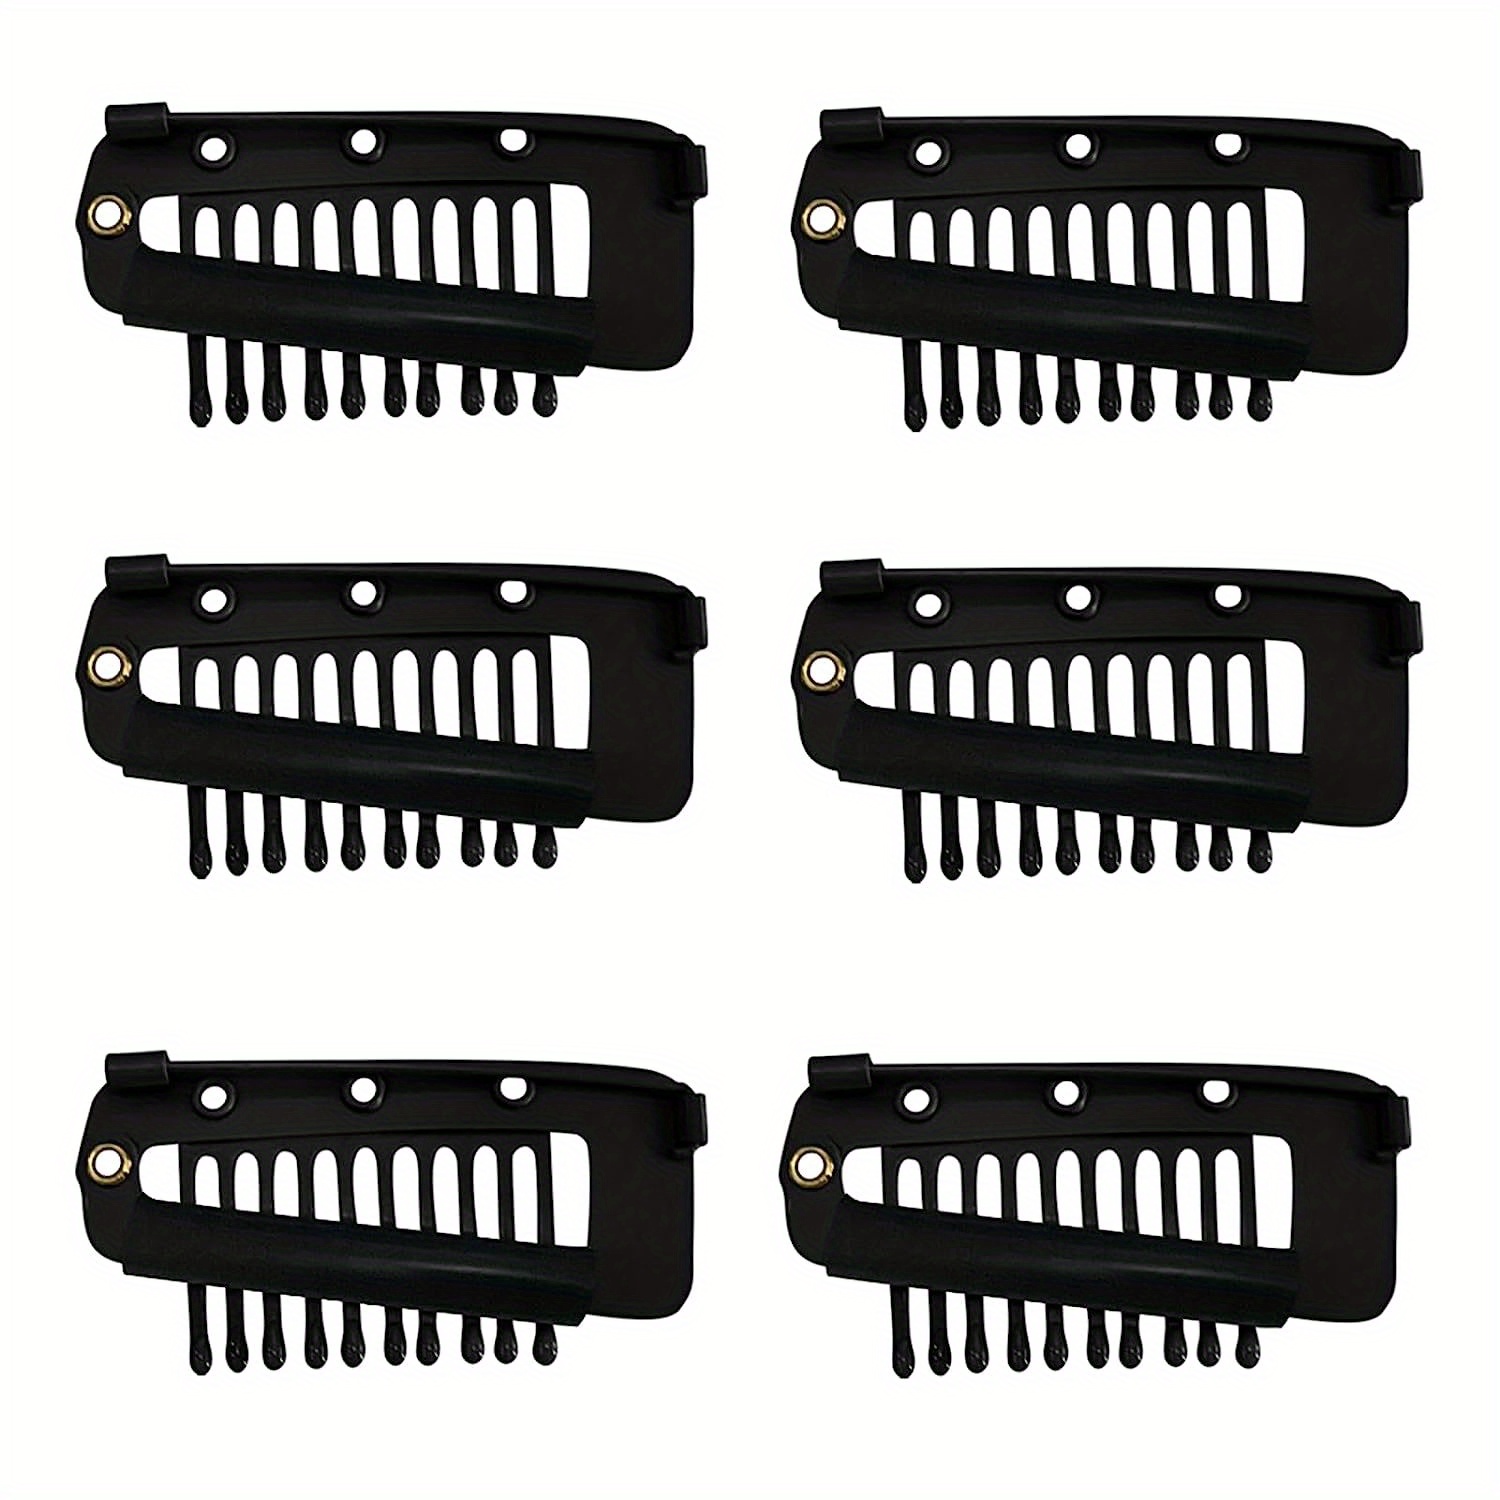 Pack of 10 Strong Chunni Clips with Safety Pin, Black 